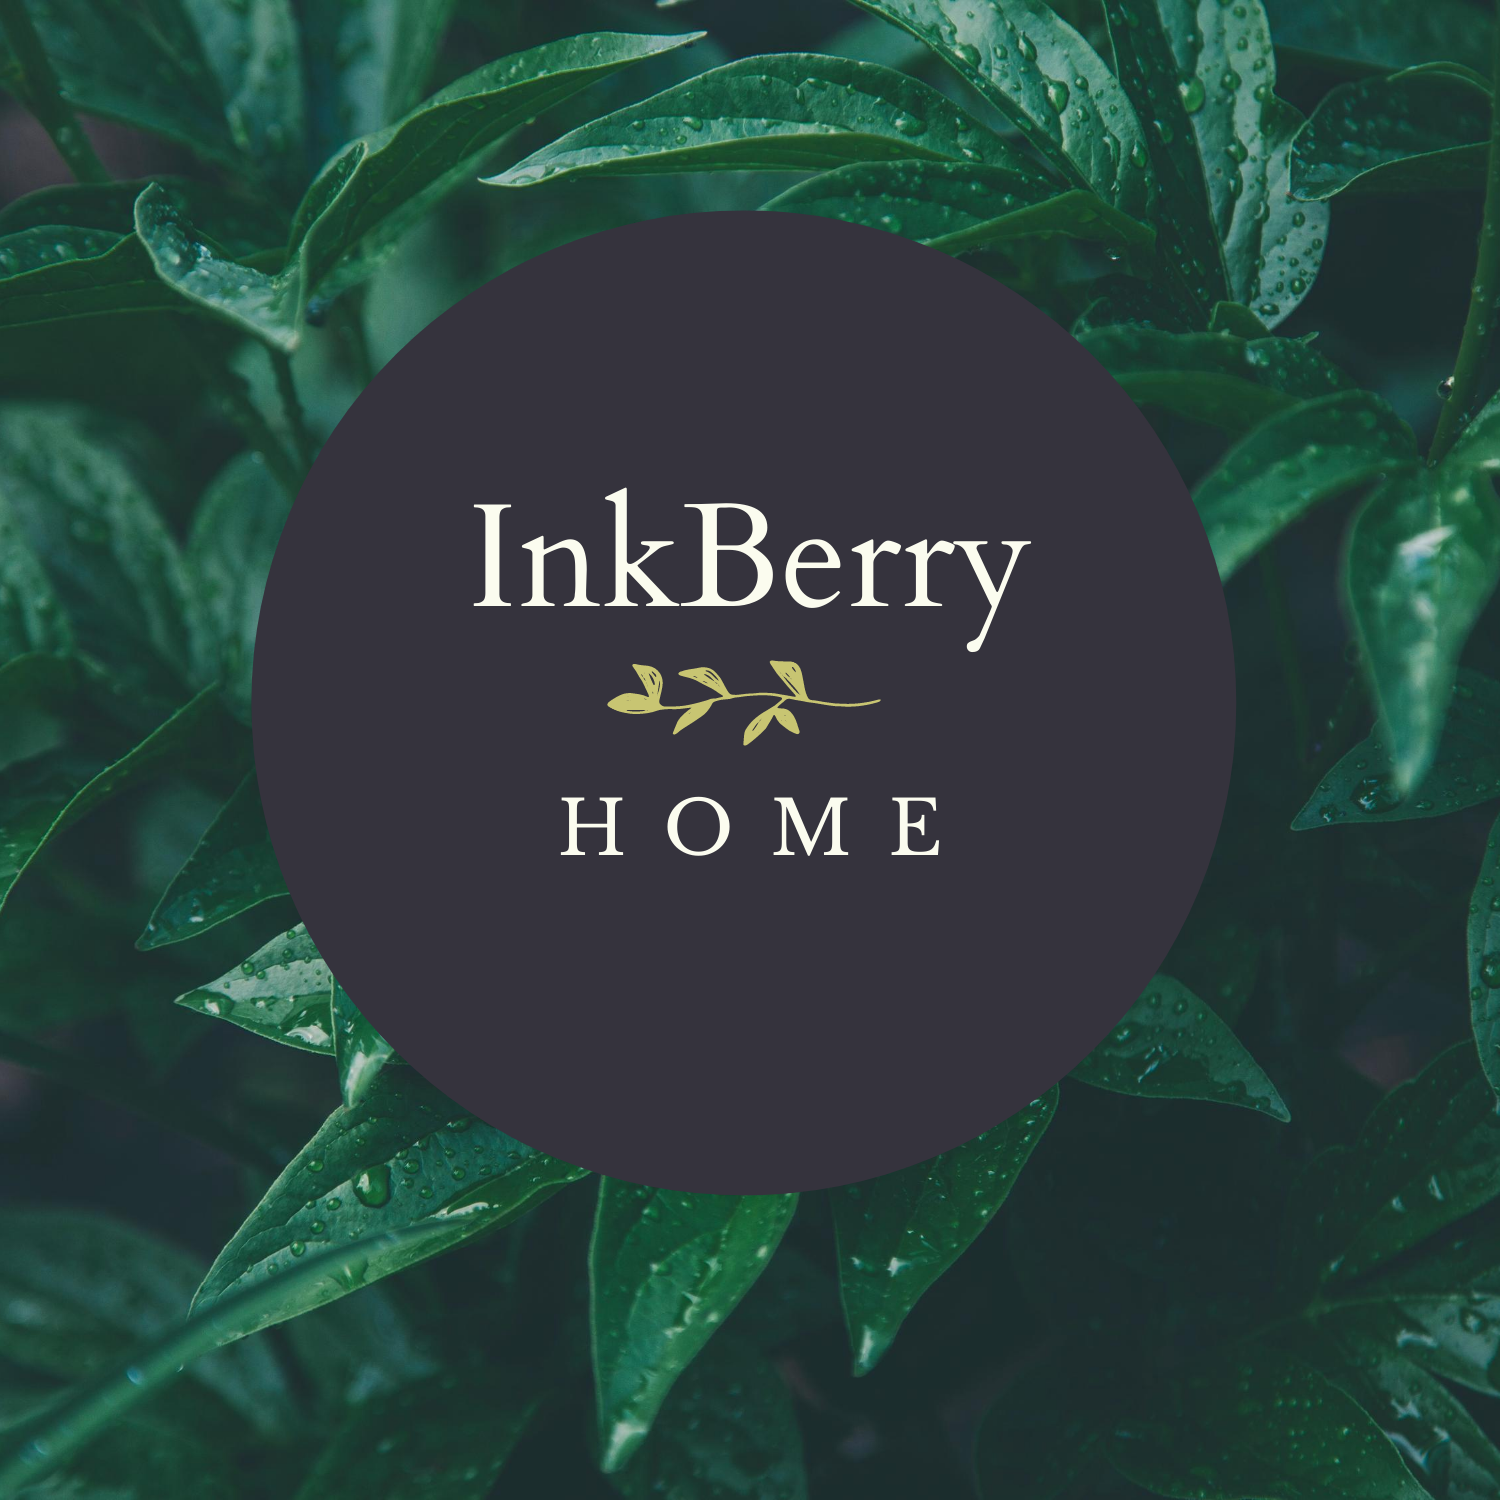 InkBerry Home